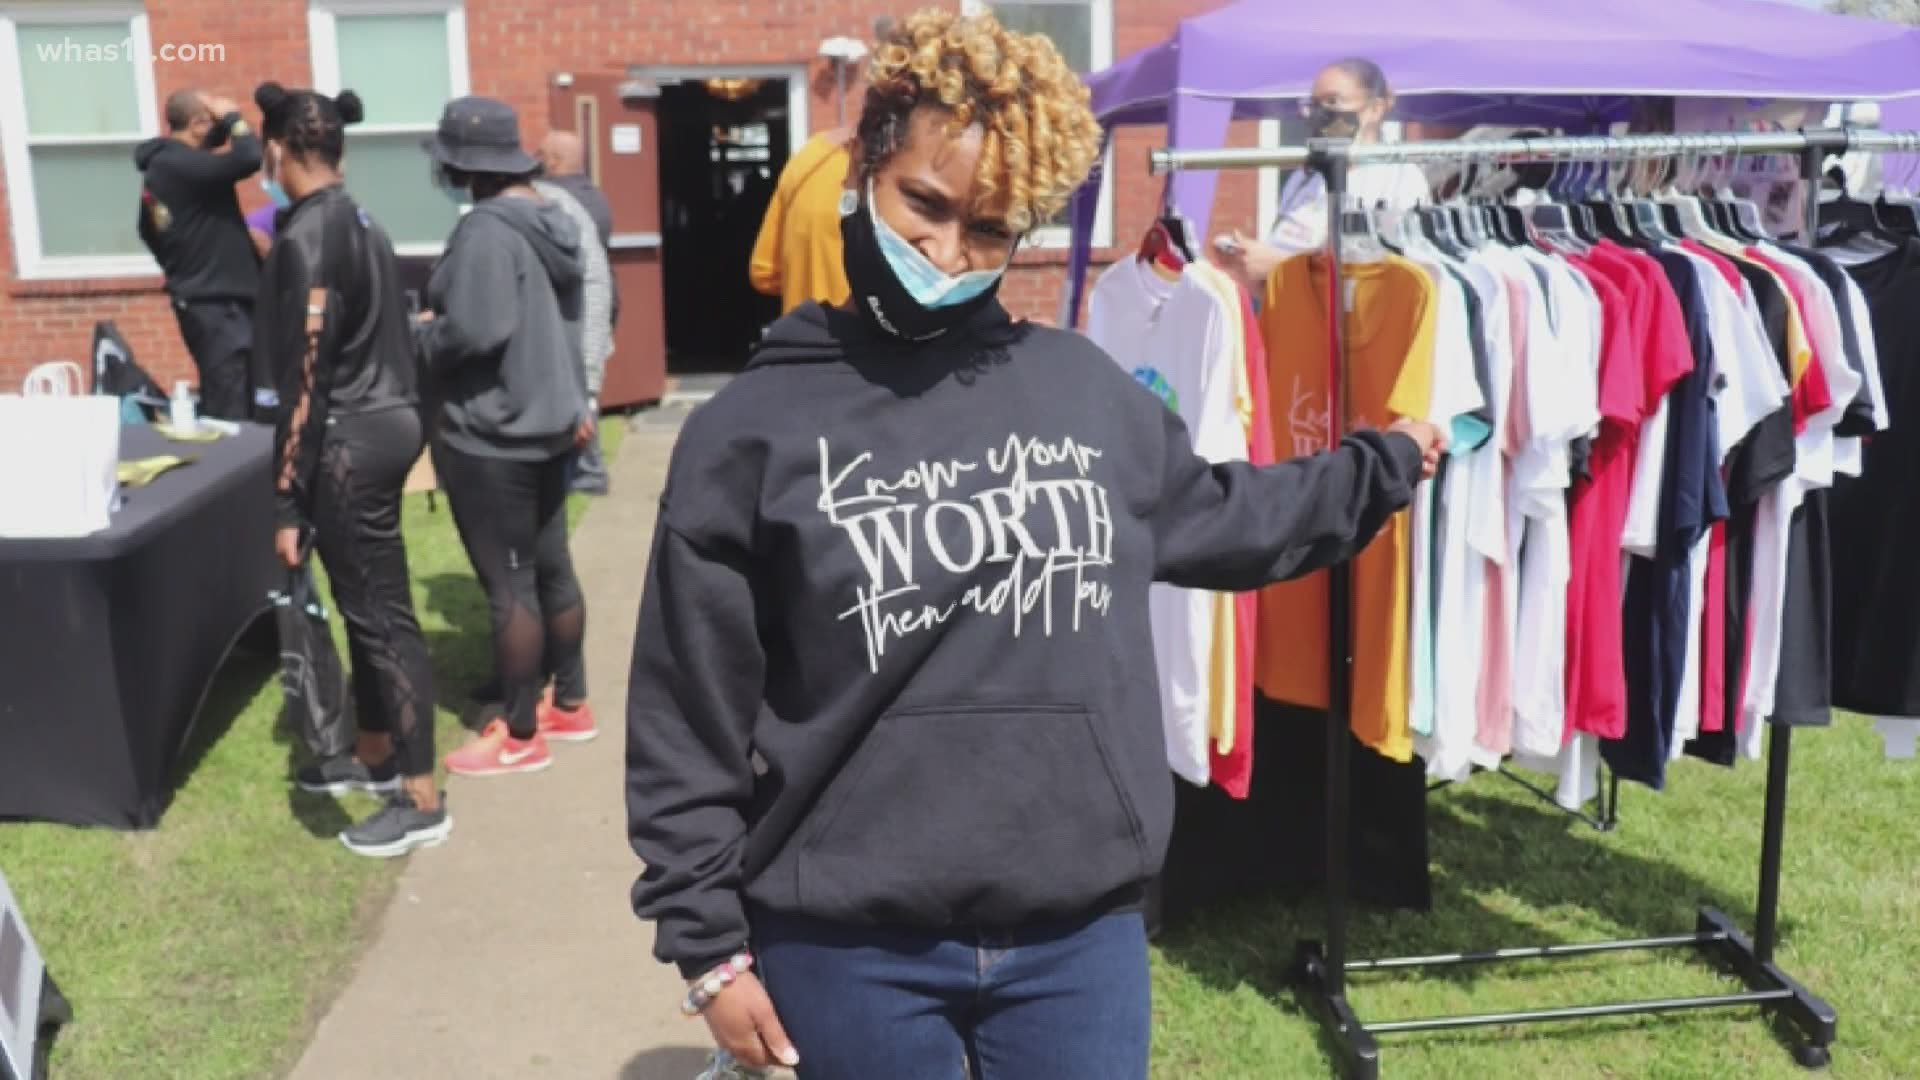 Starting on Saturday, May 15, you'll be able to buy from a number of Black-owned businesses in Downtown Louisville.